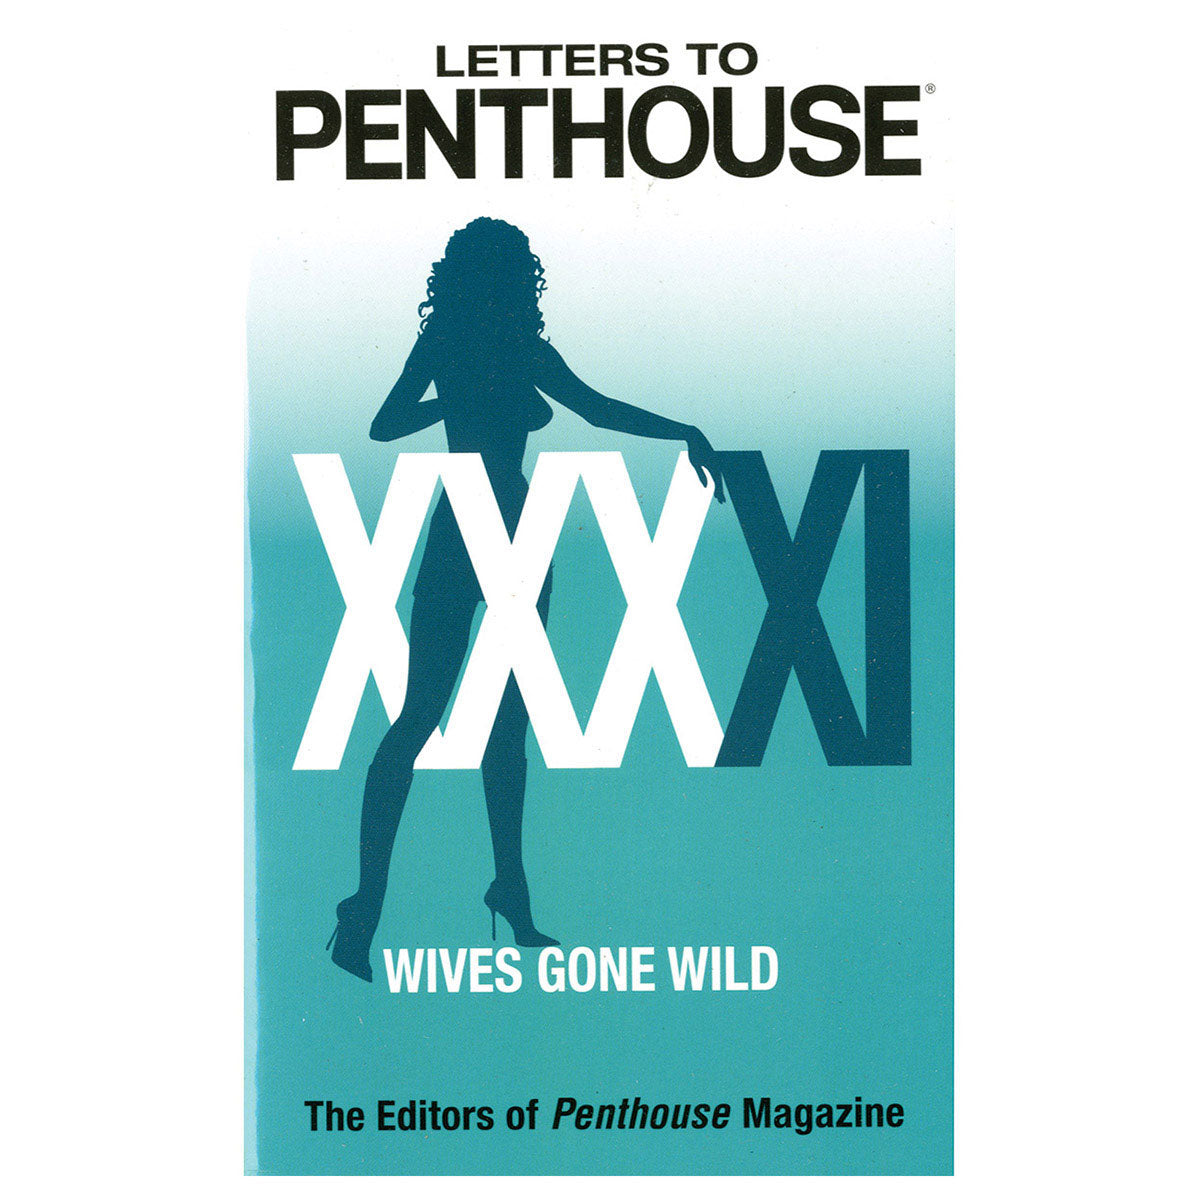 Letters to Penthouse XXXXI - Wives Gone Wild - Grand Central Publishing